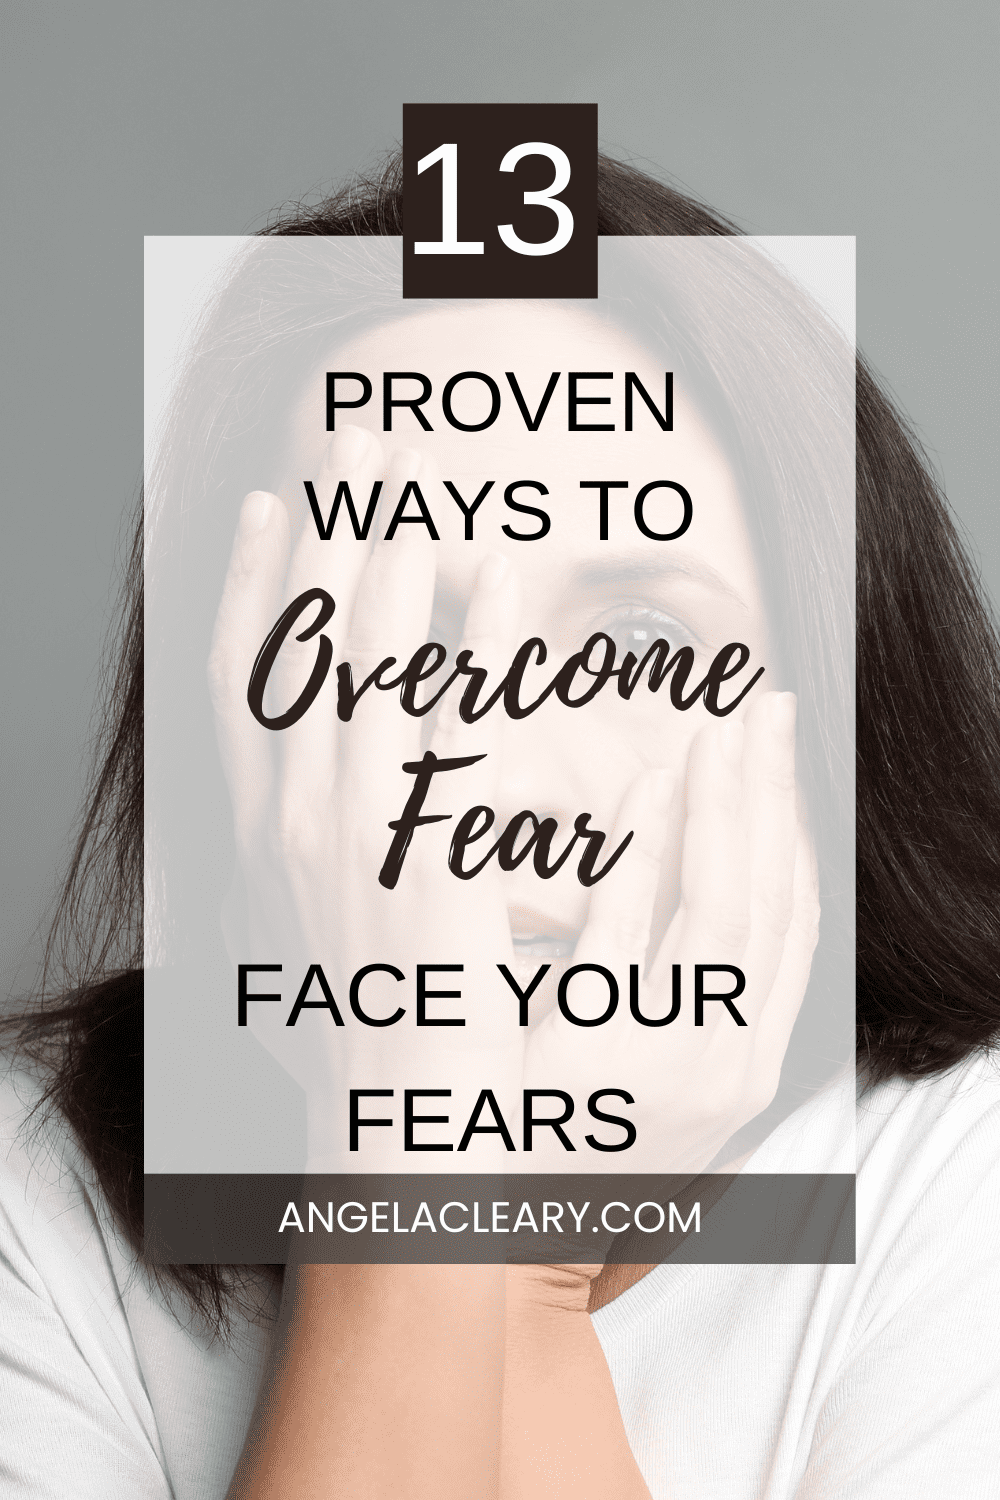 13 Proven Ways to Face Your Fears Head On